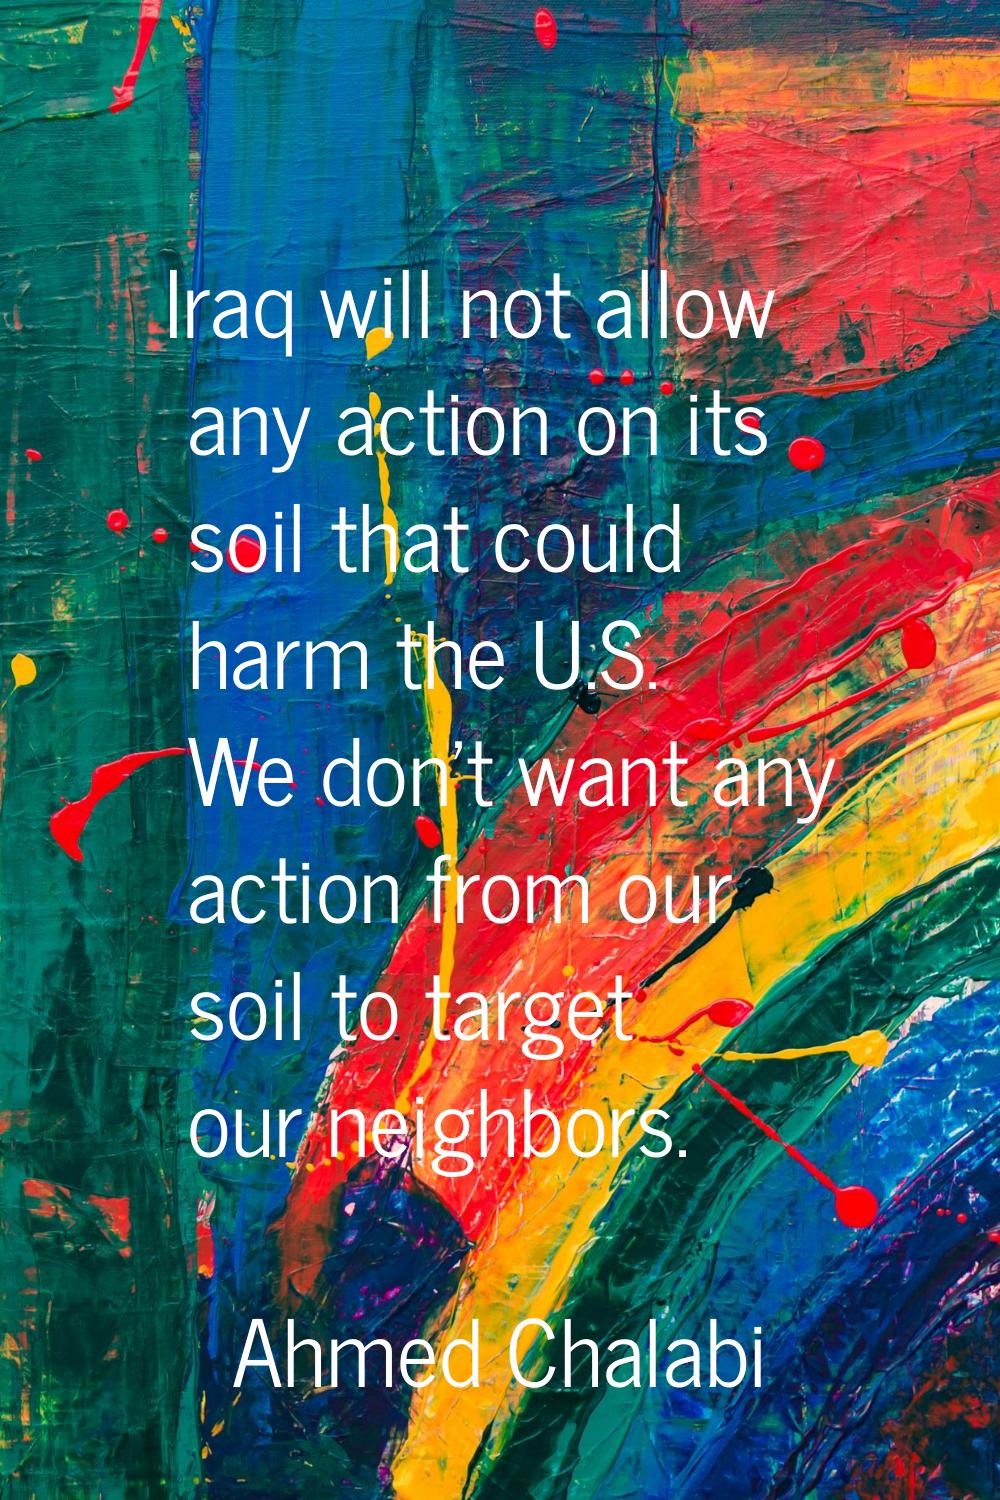 Iraq will not allow any action on its soil that could harm the U.S. We don't want any action from o